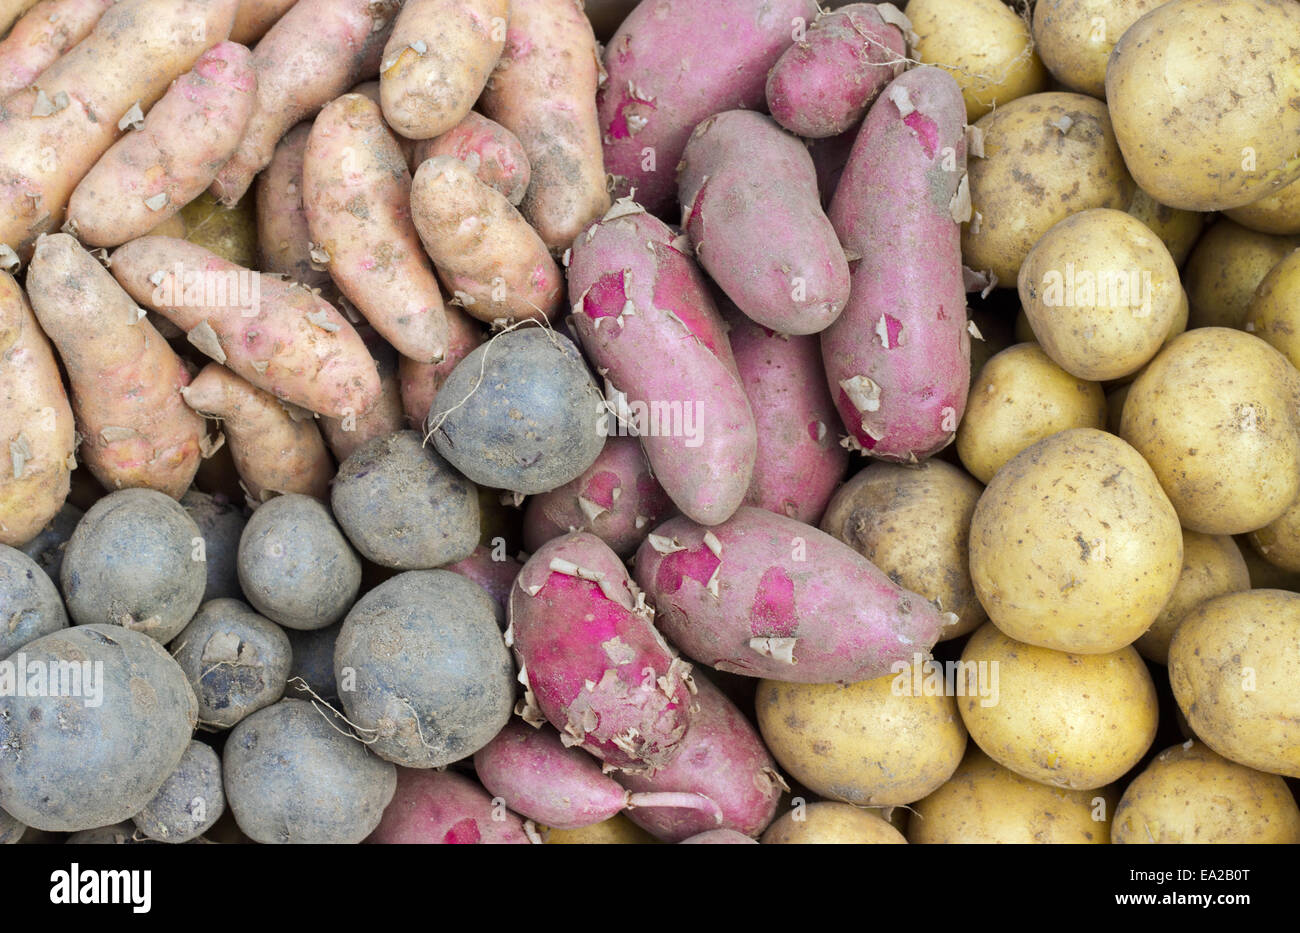 fresh, different red, yellow and blue potatoes Stock Photo